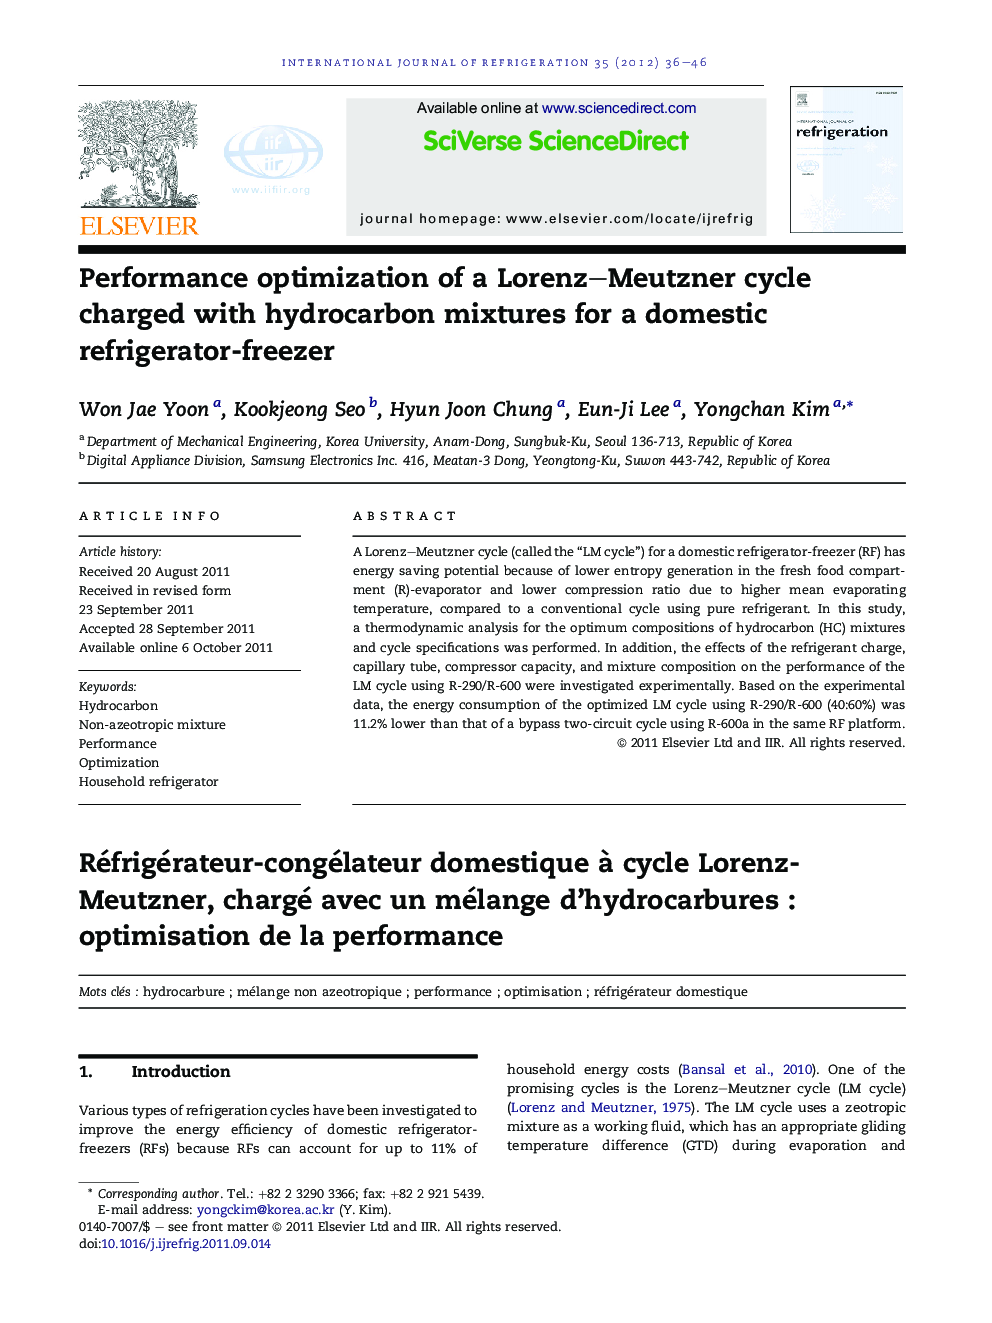 Performance optimization of a Lorenz–Meutzner cycle charged with hydrocarbon mixtures for a domestic refrigerator-freezer